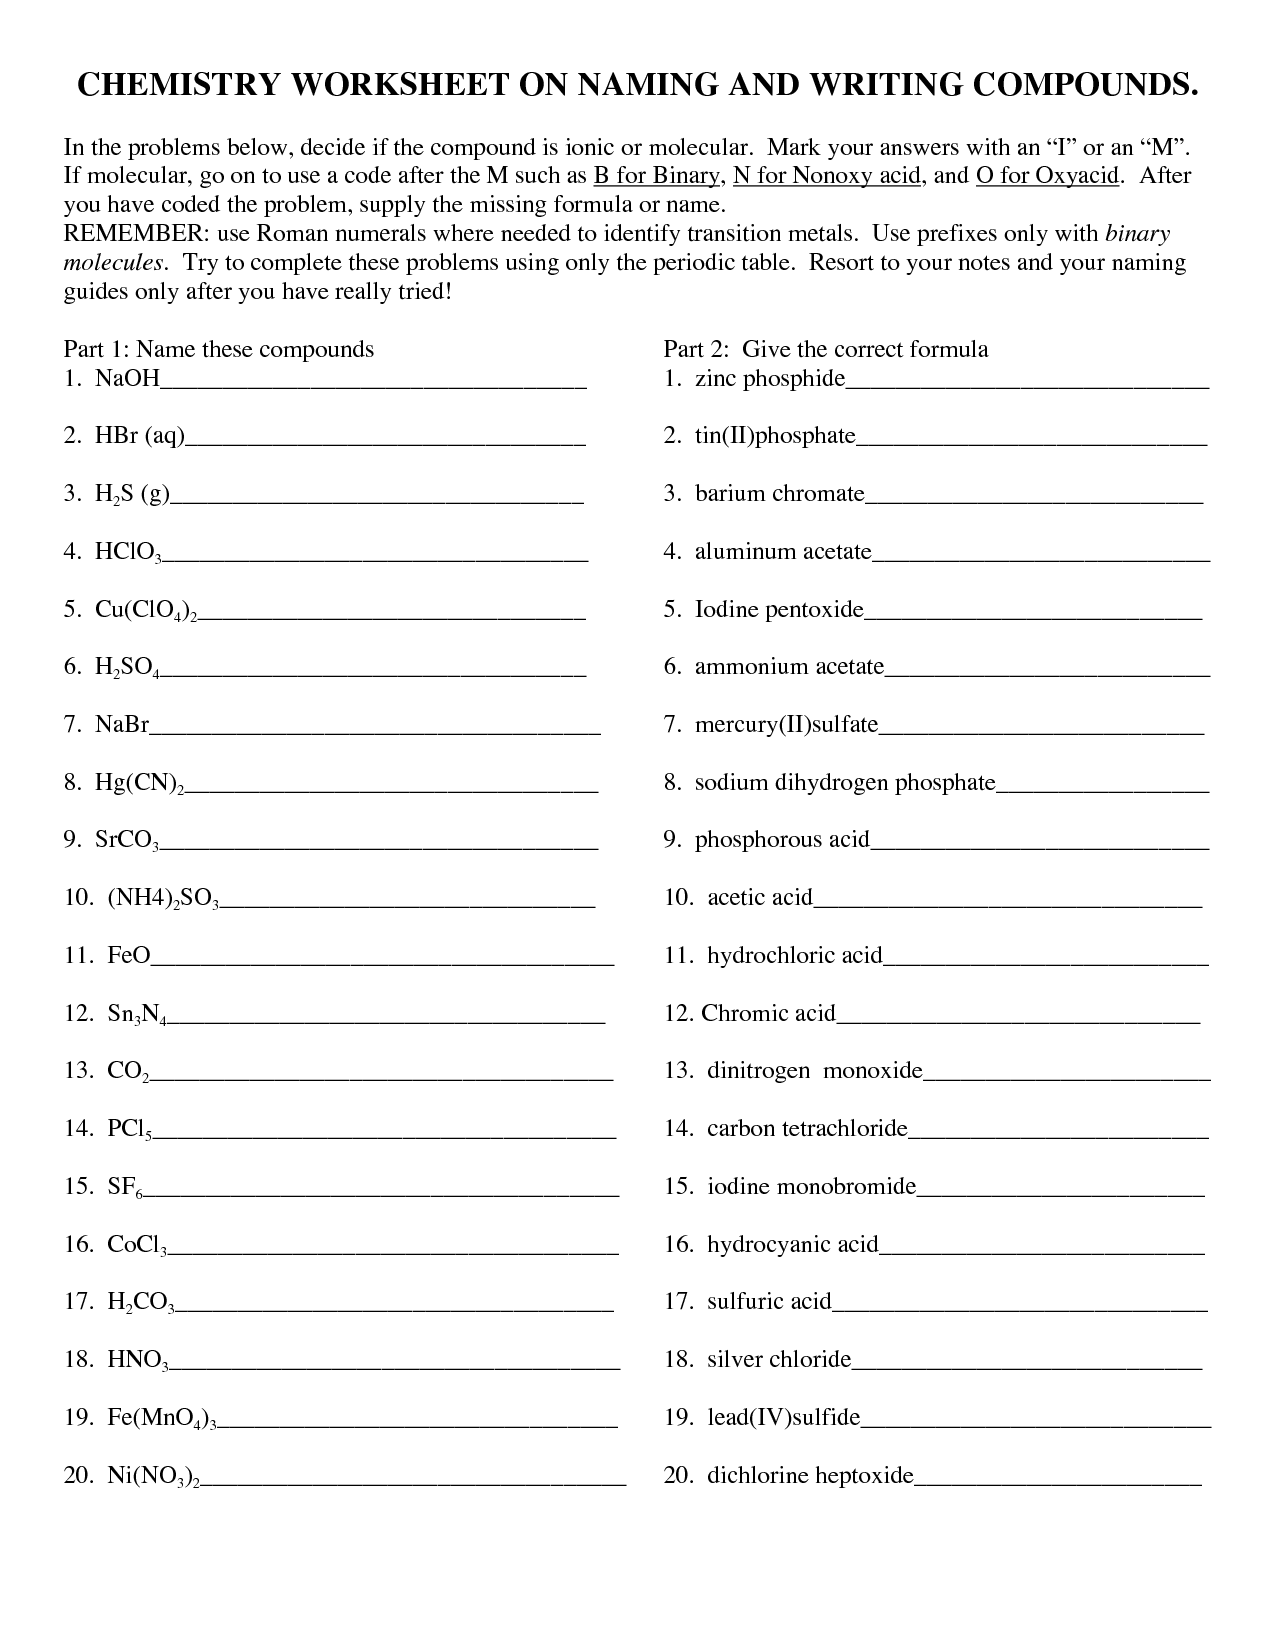 Chemistry Naming Compounds Worksheet Answers Image